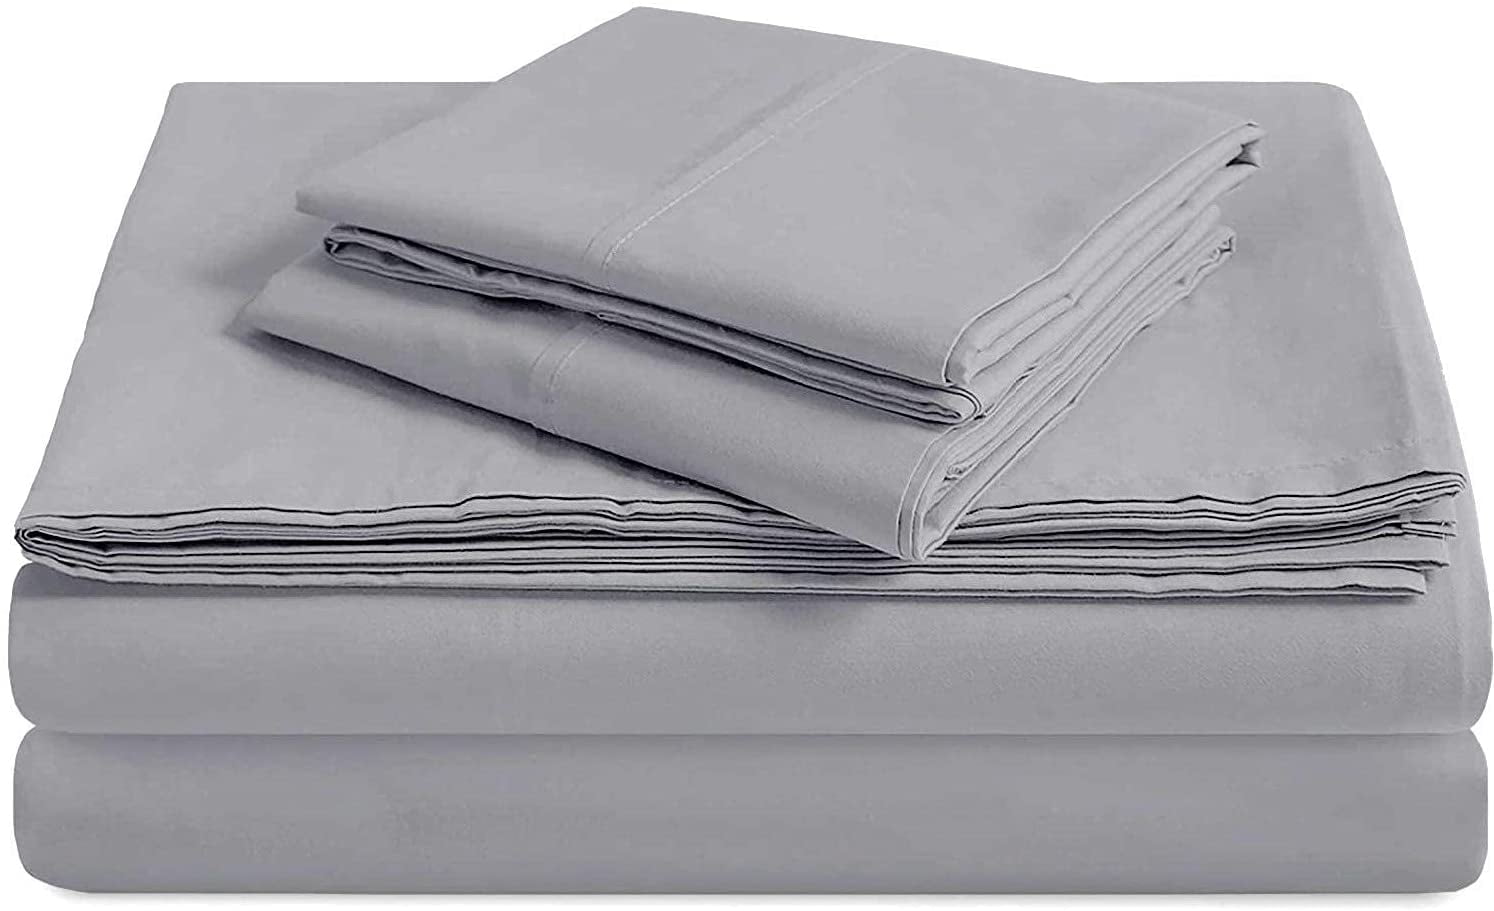 100% Real Egyptian Cotton Waterbed Sheets Queen/King all size 15" to 18" Deep